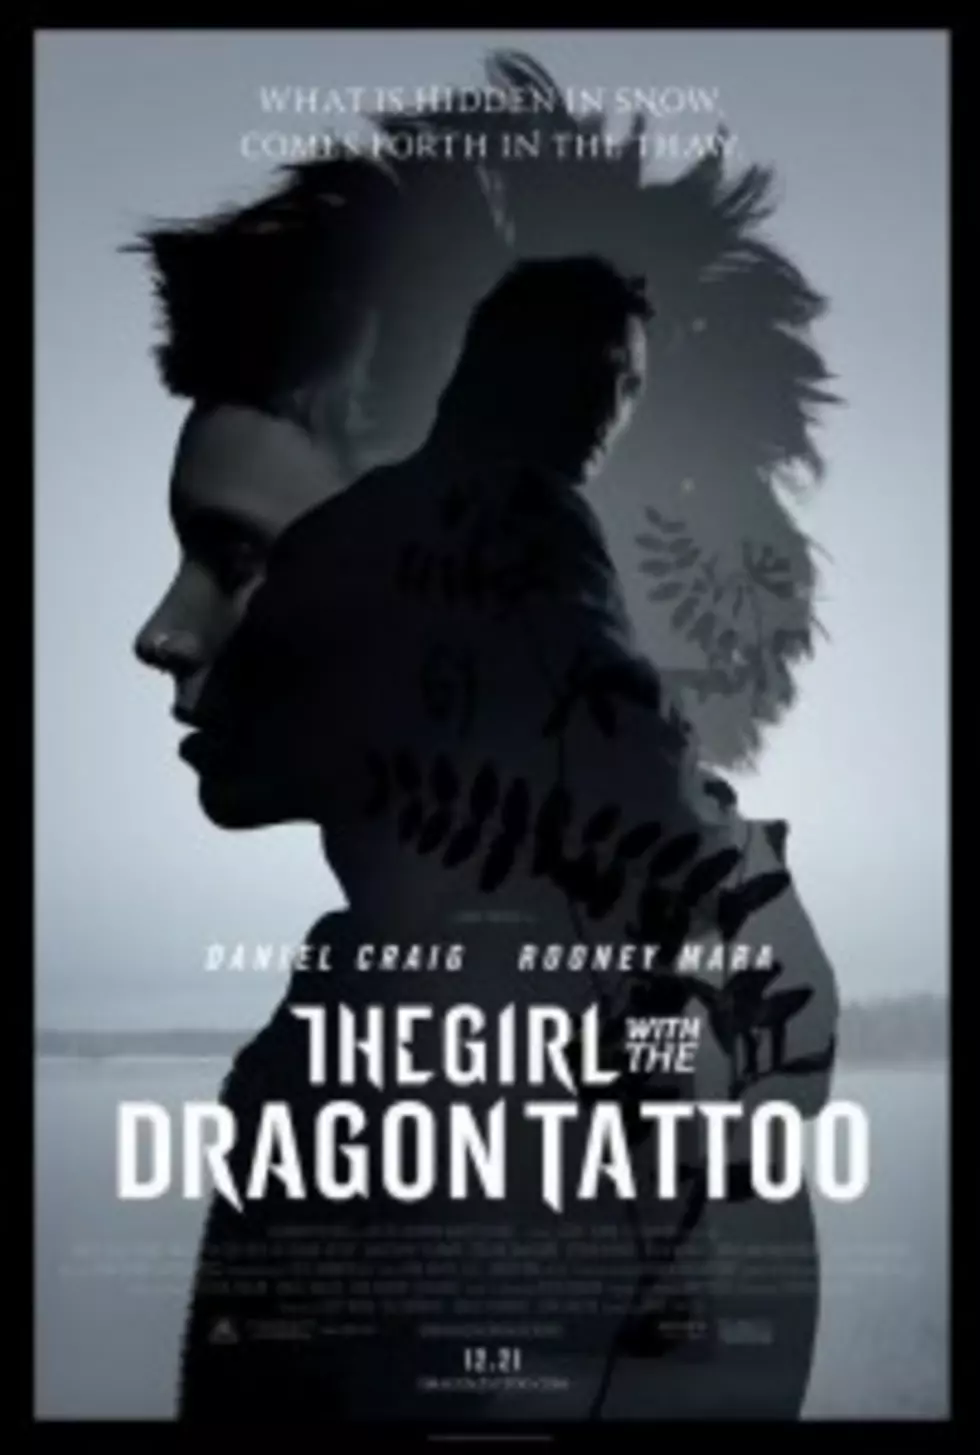 At The Movies: The Girl With The Dragon Tattoo [Review]